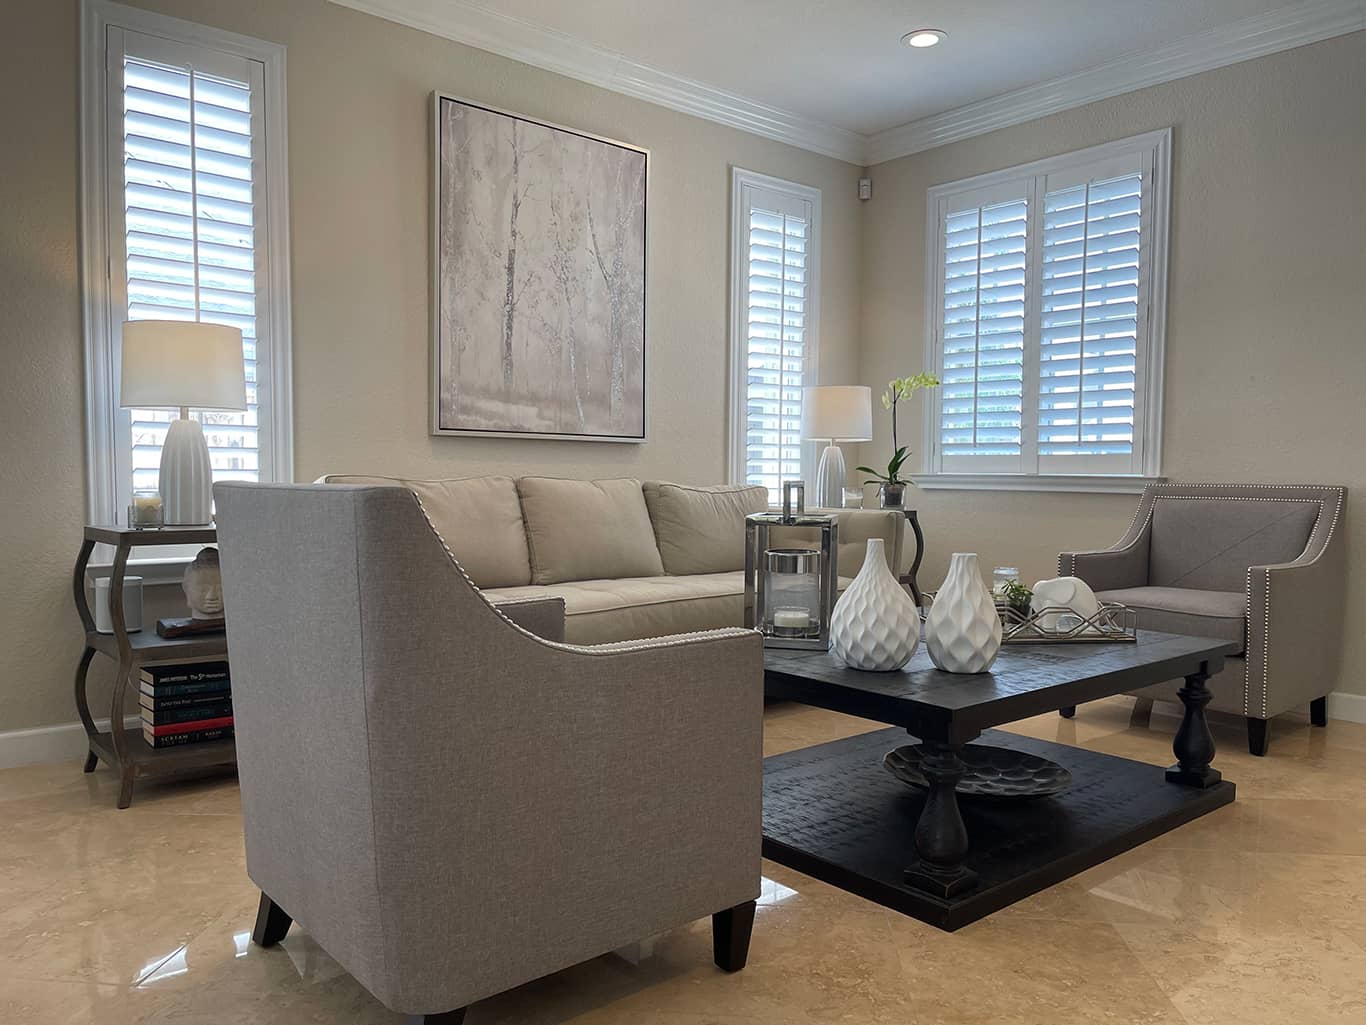 LouverWood poly plantation shutters in a sitting room